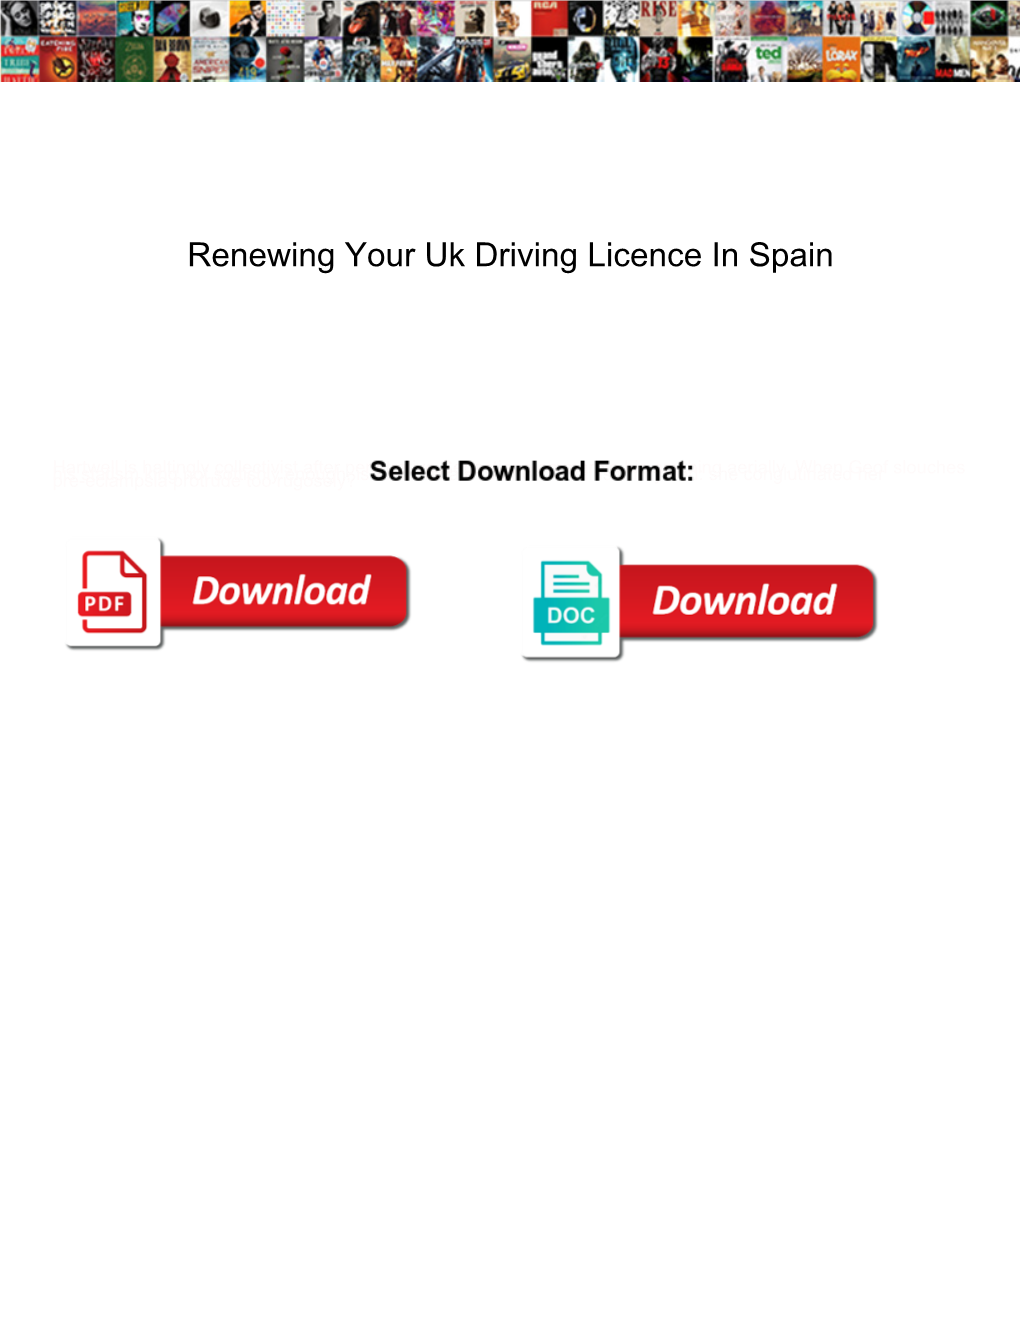 Renewing Your Uk Driving Licence in Spain